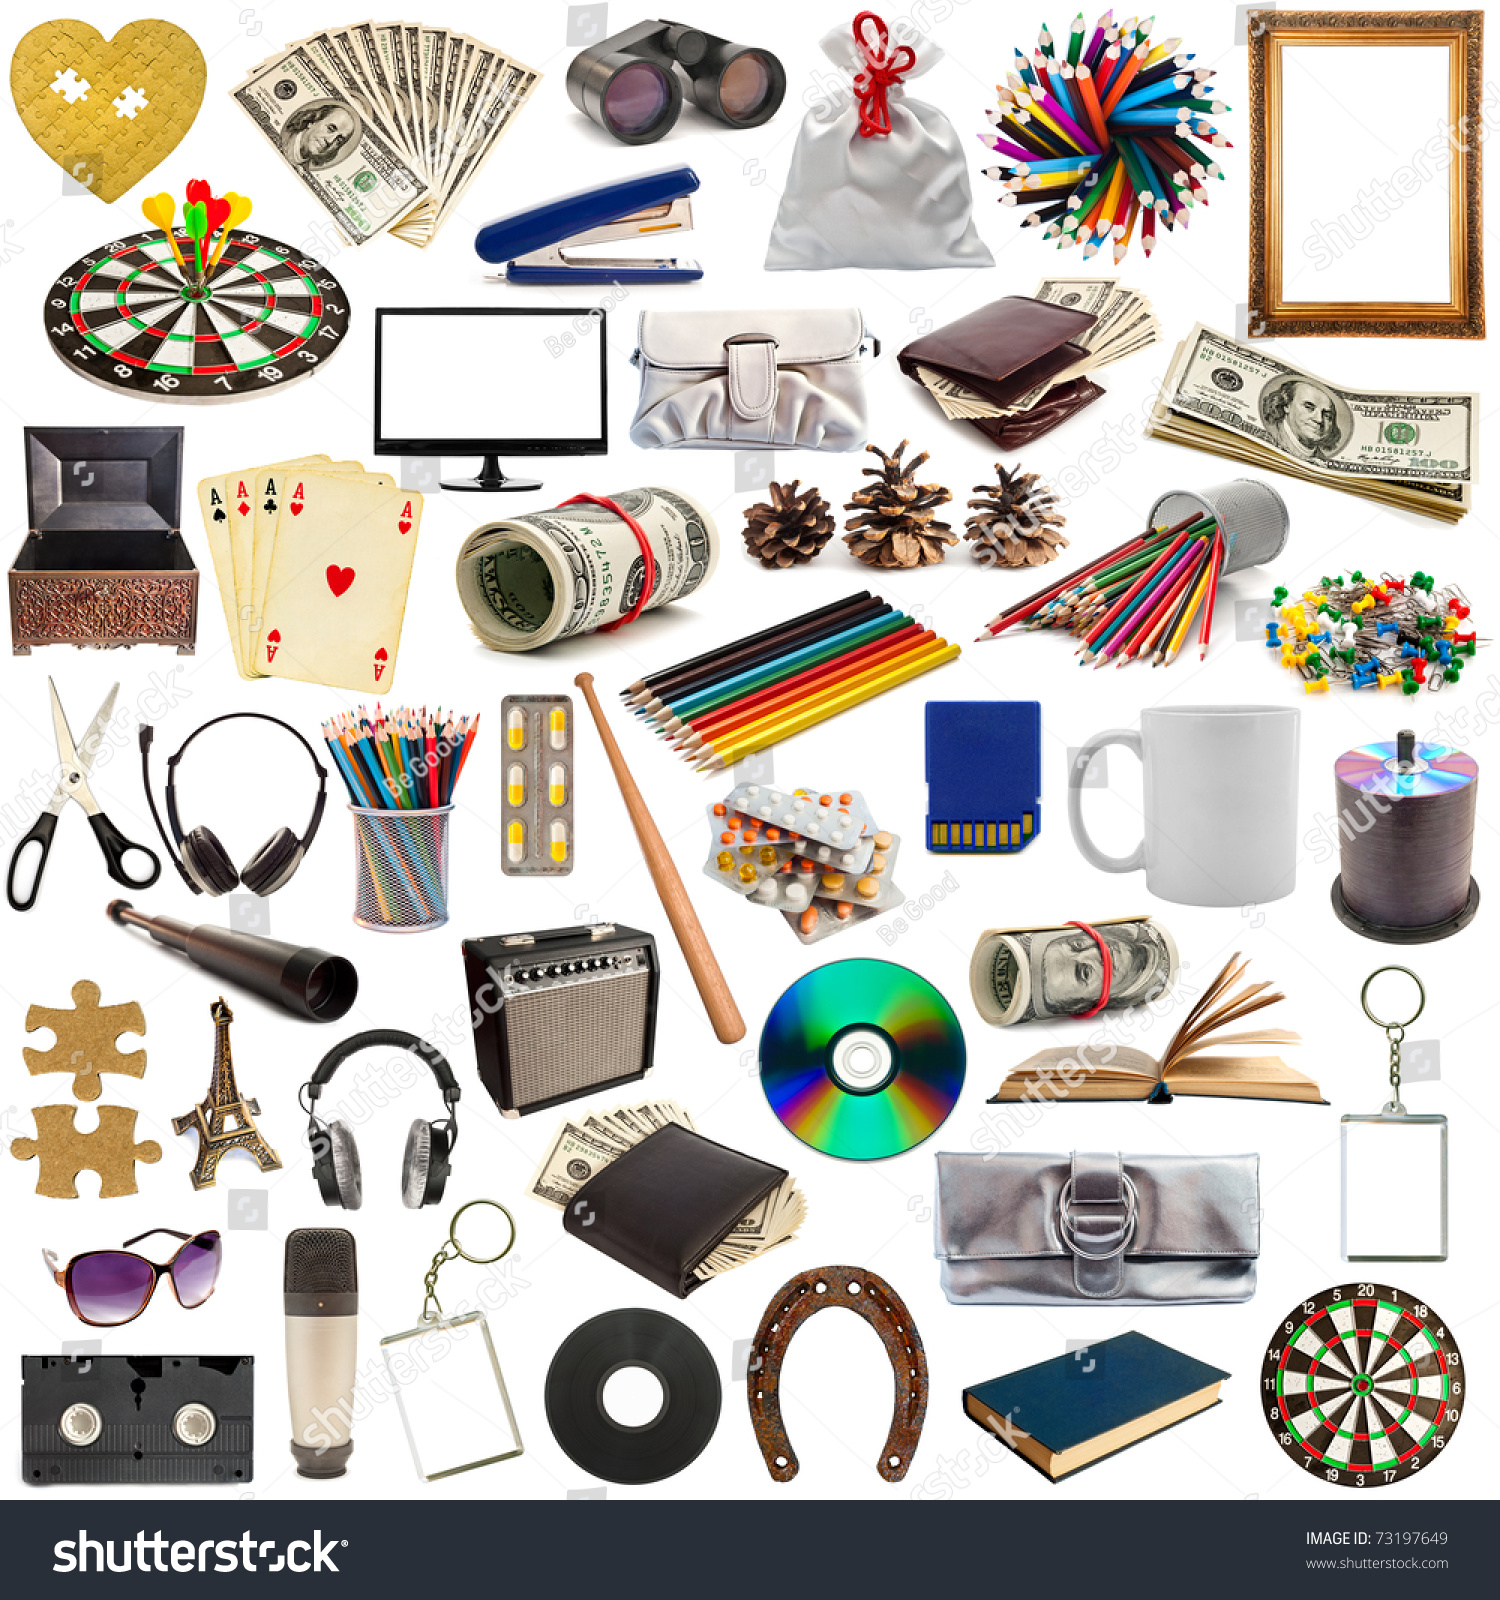 objects clipart images - photo #43